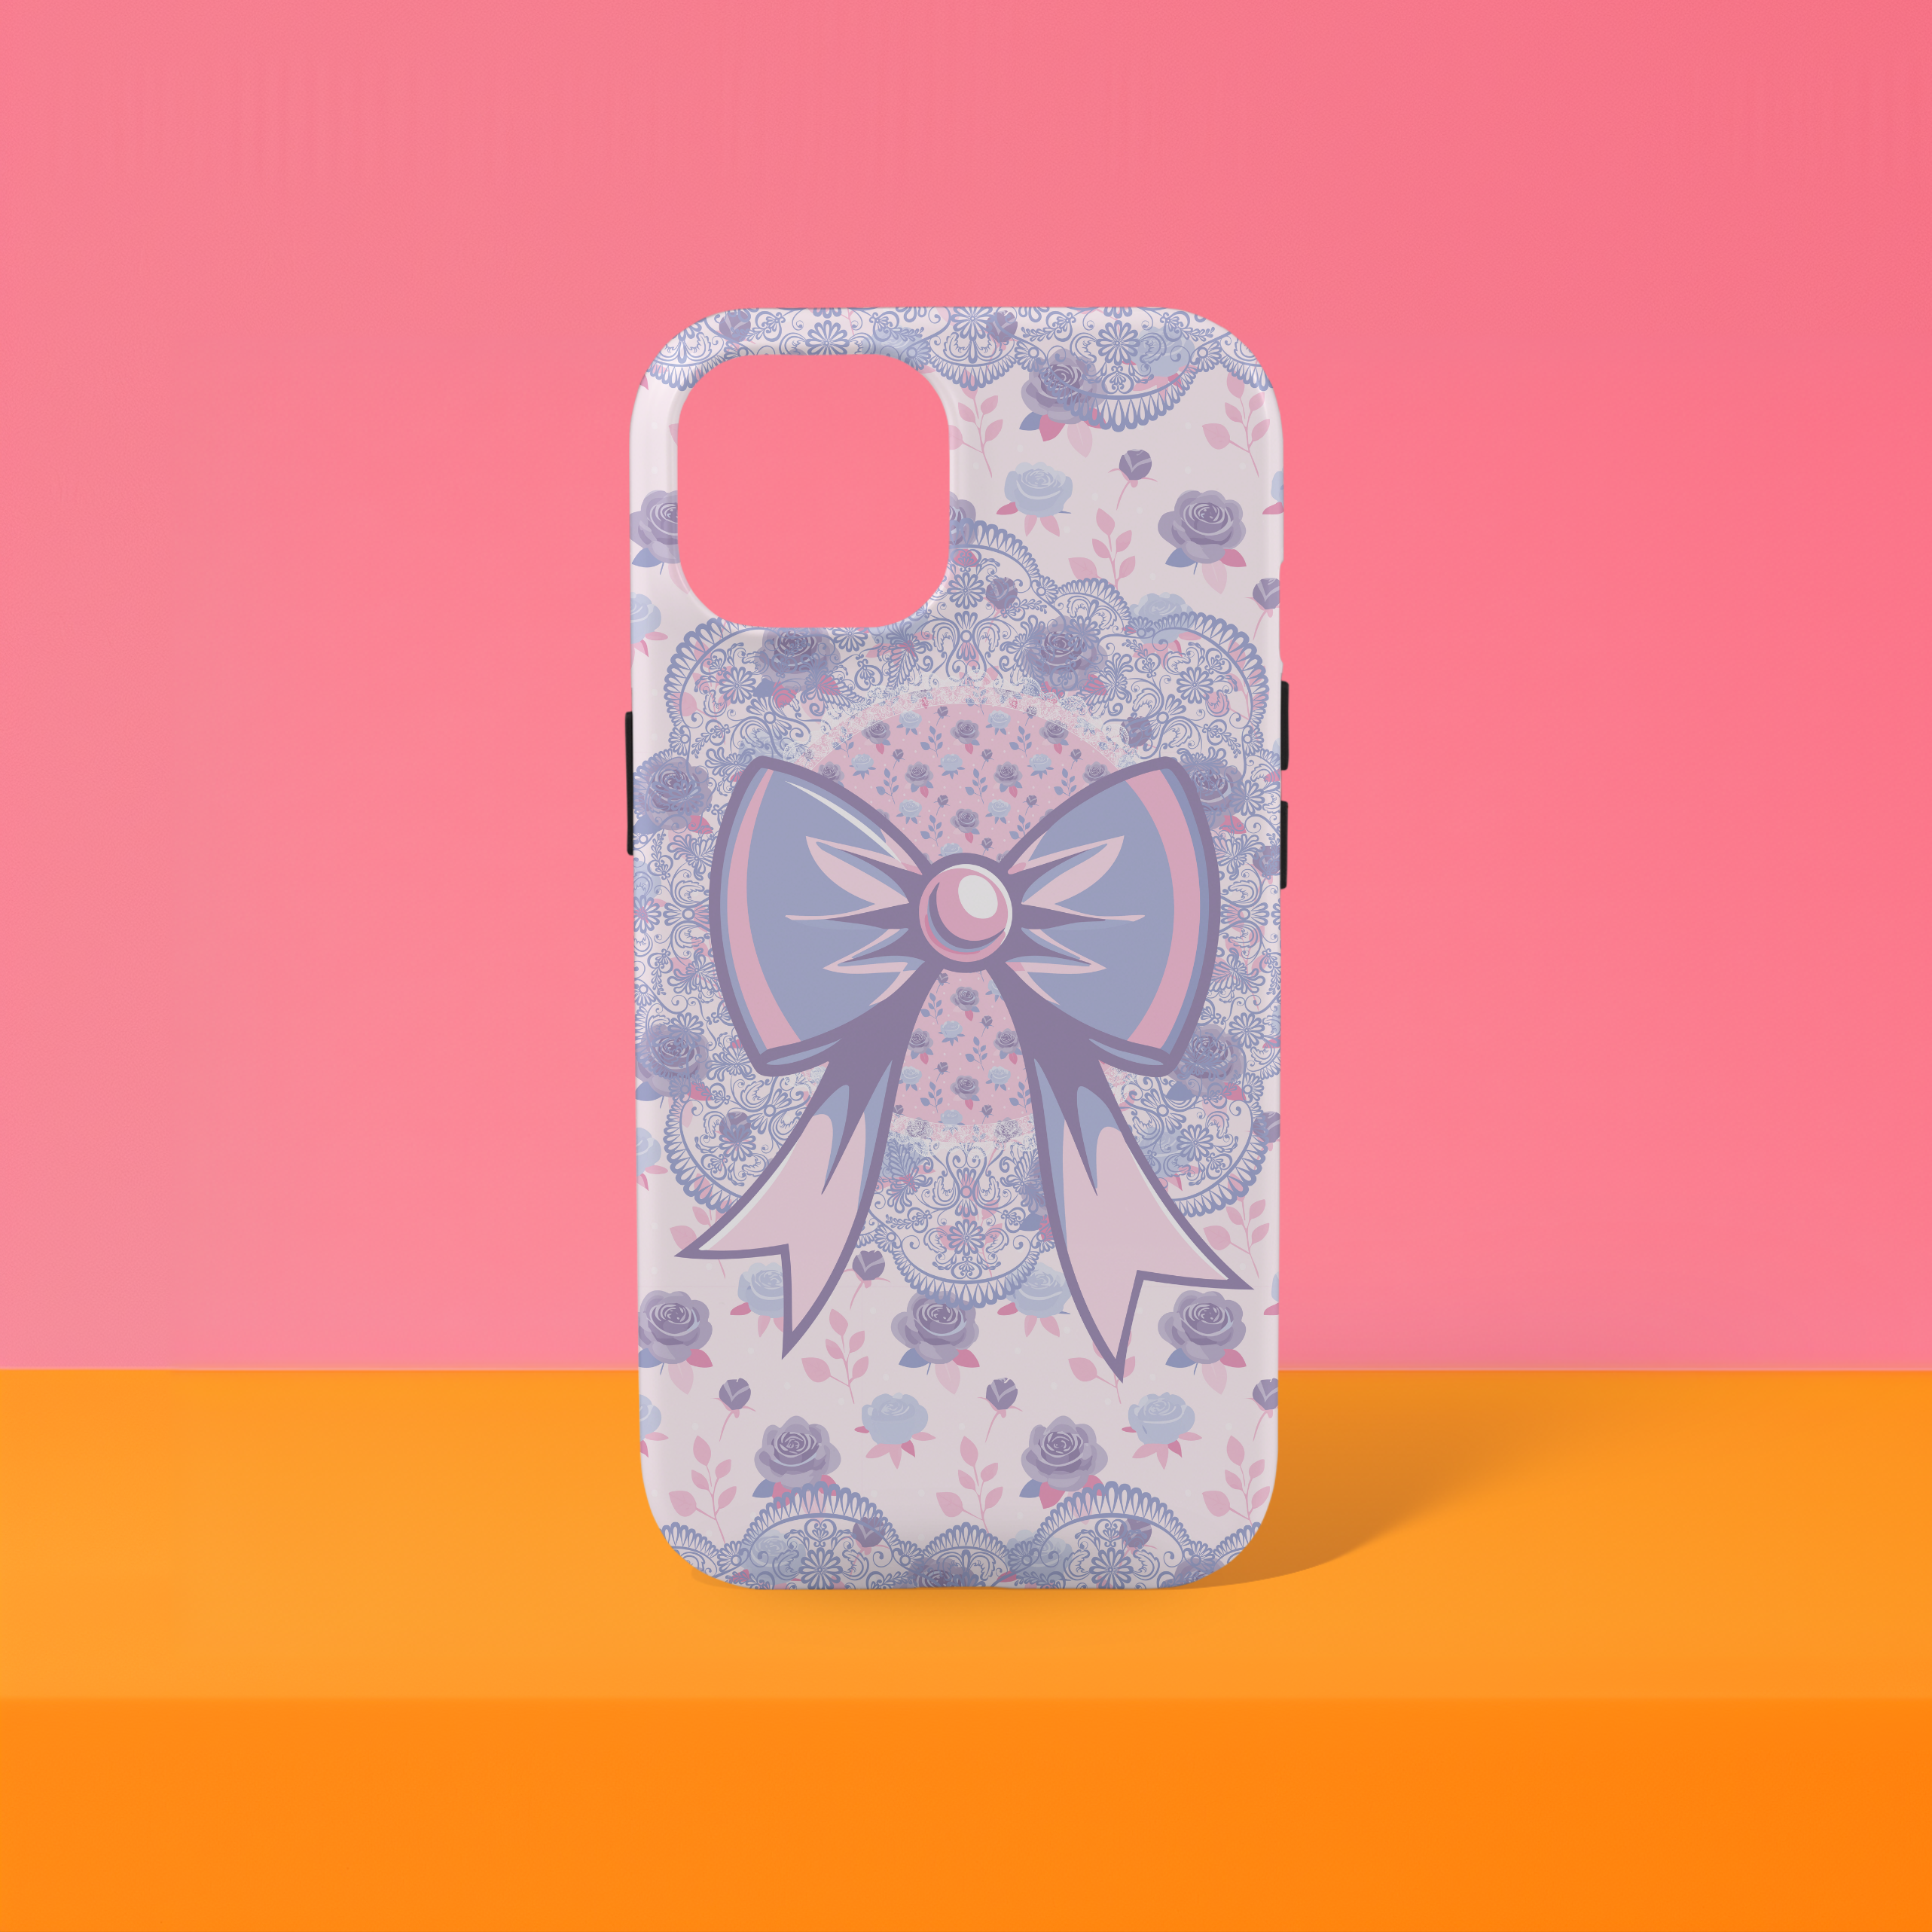 Coquette phone case featuring a pastel purple bow and pink floral lace background, dual-layer protection, UV protected, compatible with iPhone, Samsung Galaxy, and Google Pixel.